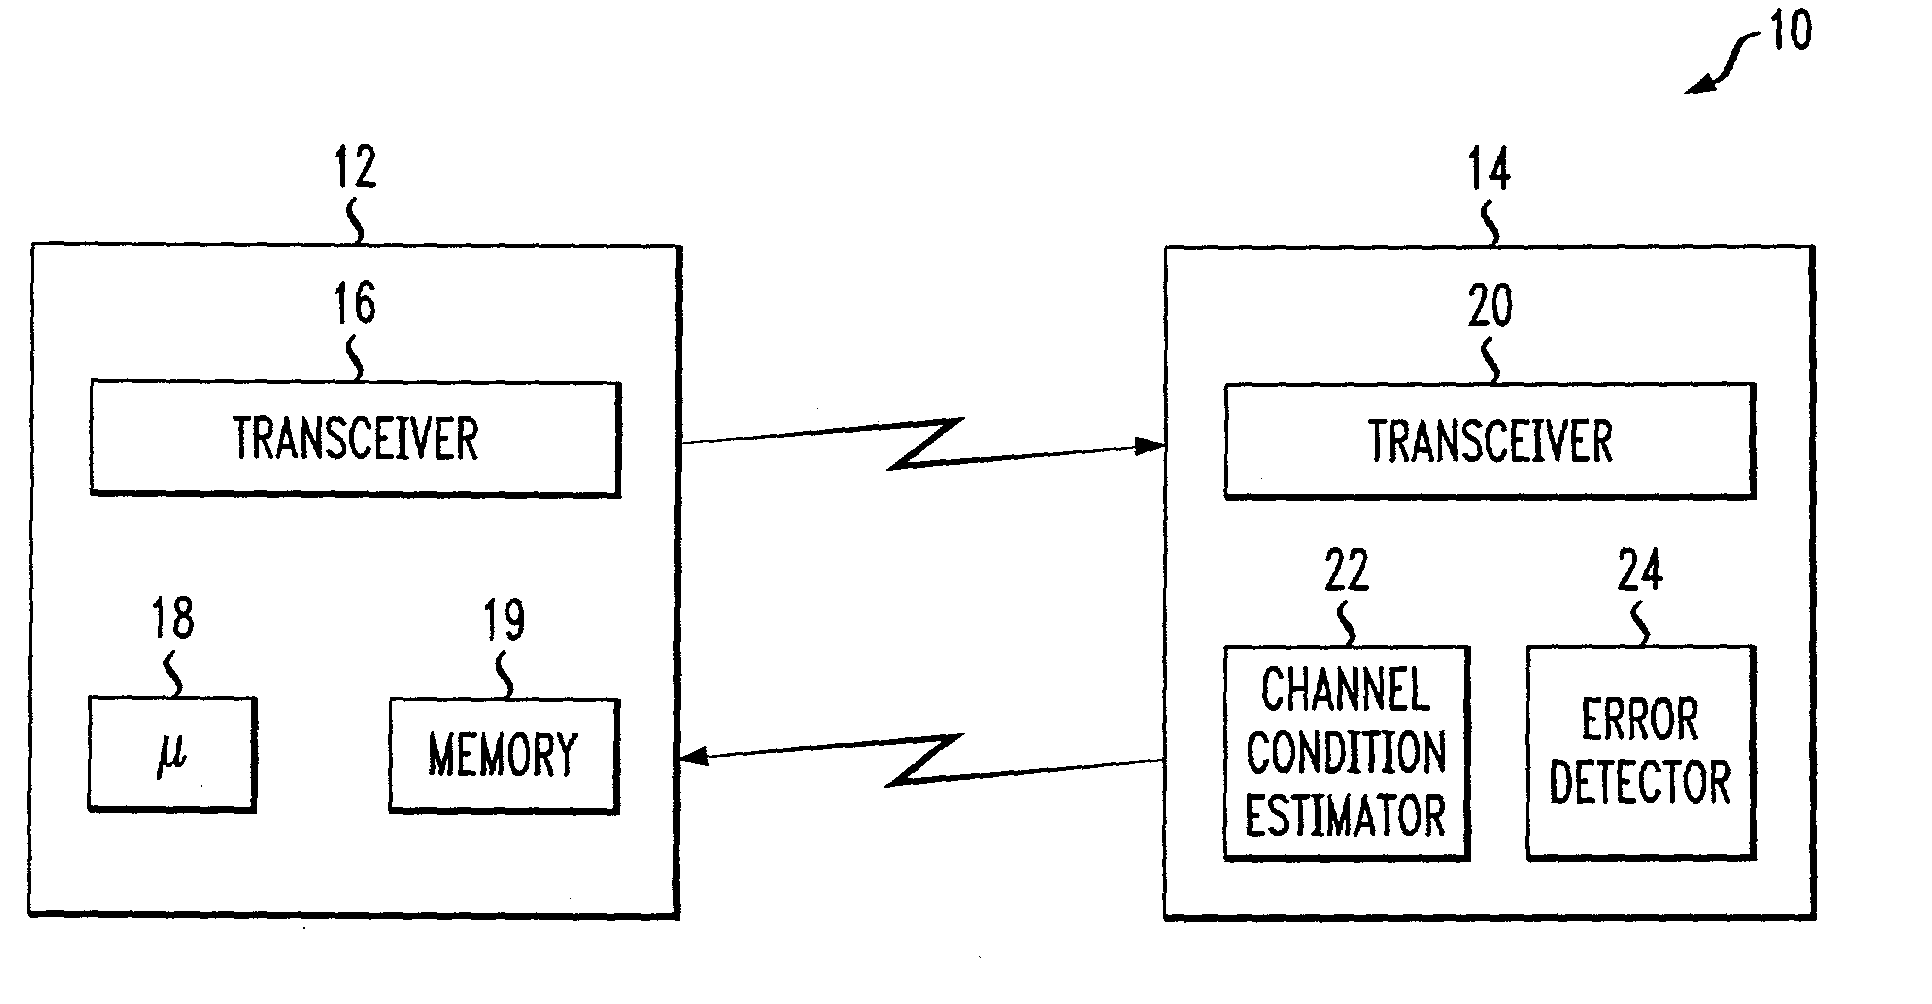 Adapative quality control loop for link rate adaptation in data packet communications